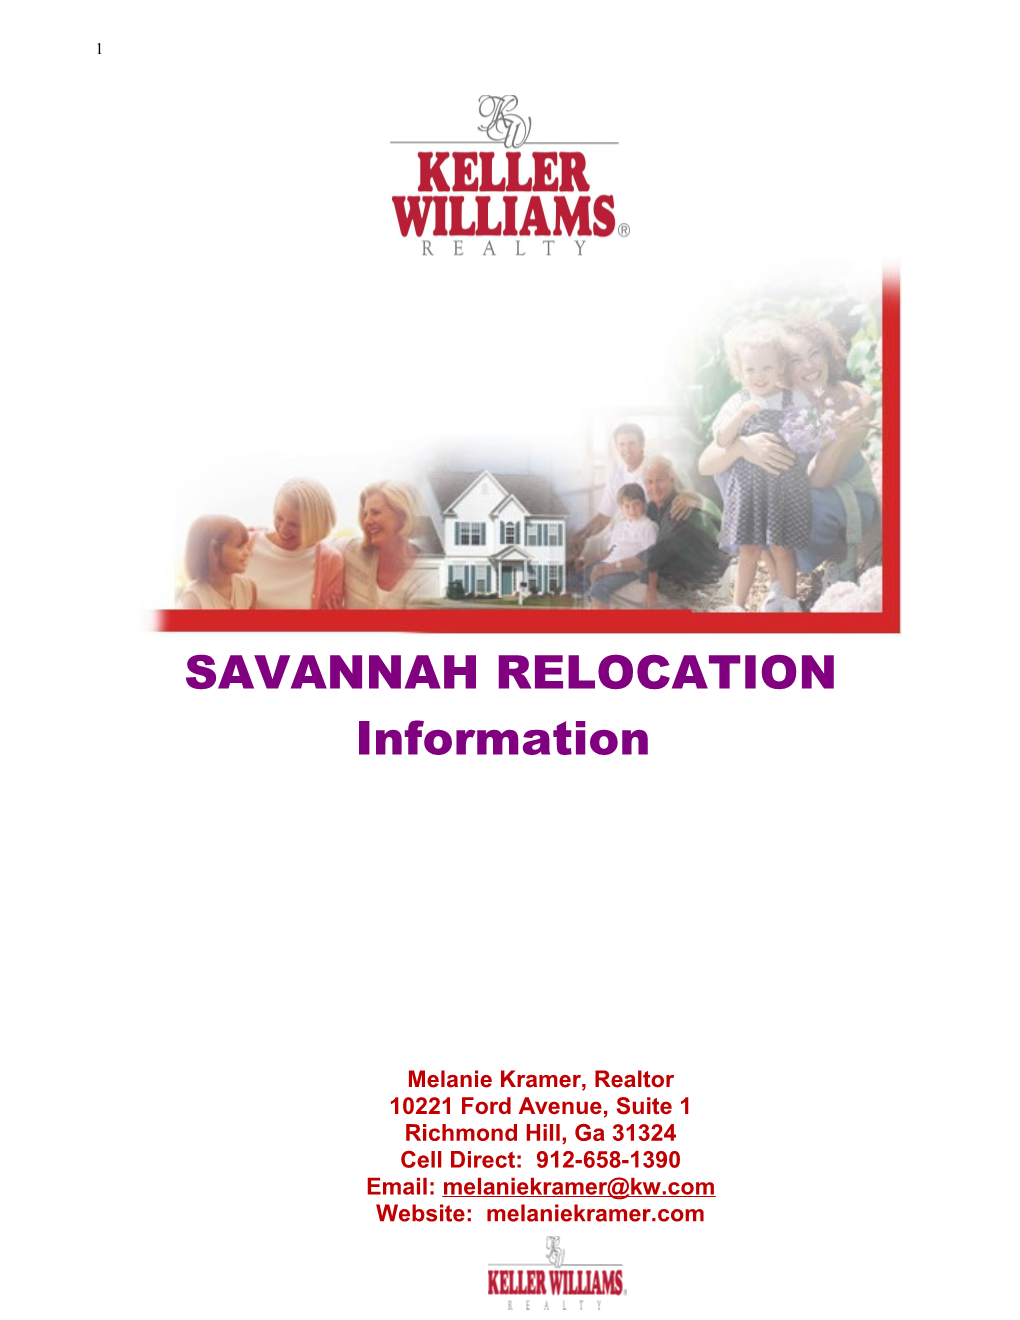 If You Are Planning A Move To The Savannah Area, You Will Want Some Information About The Region